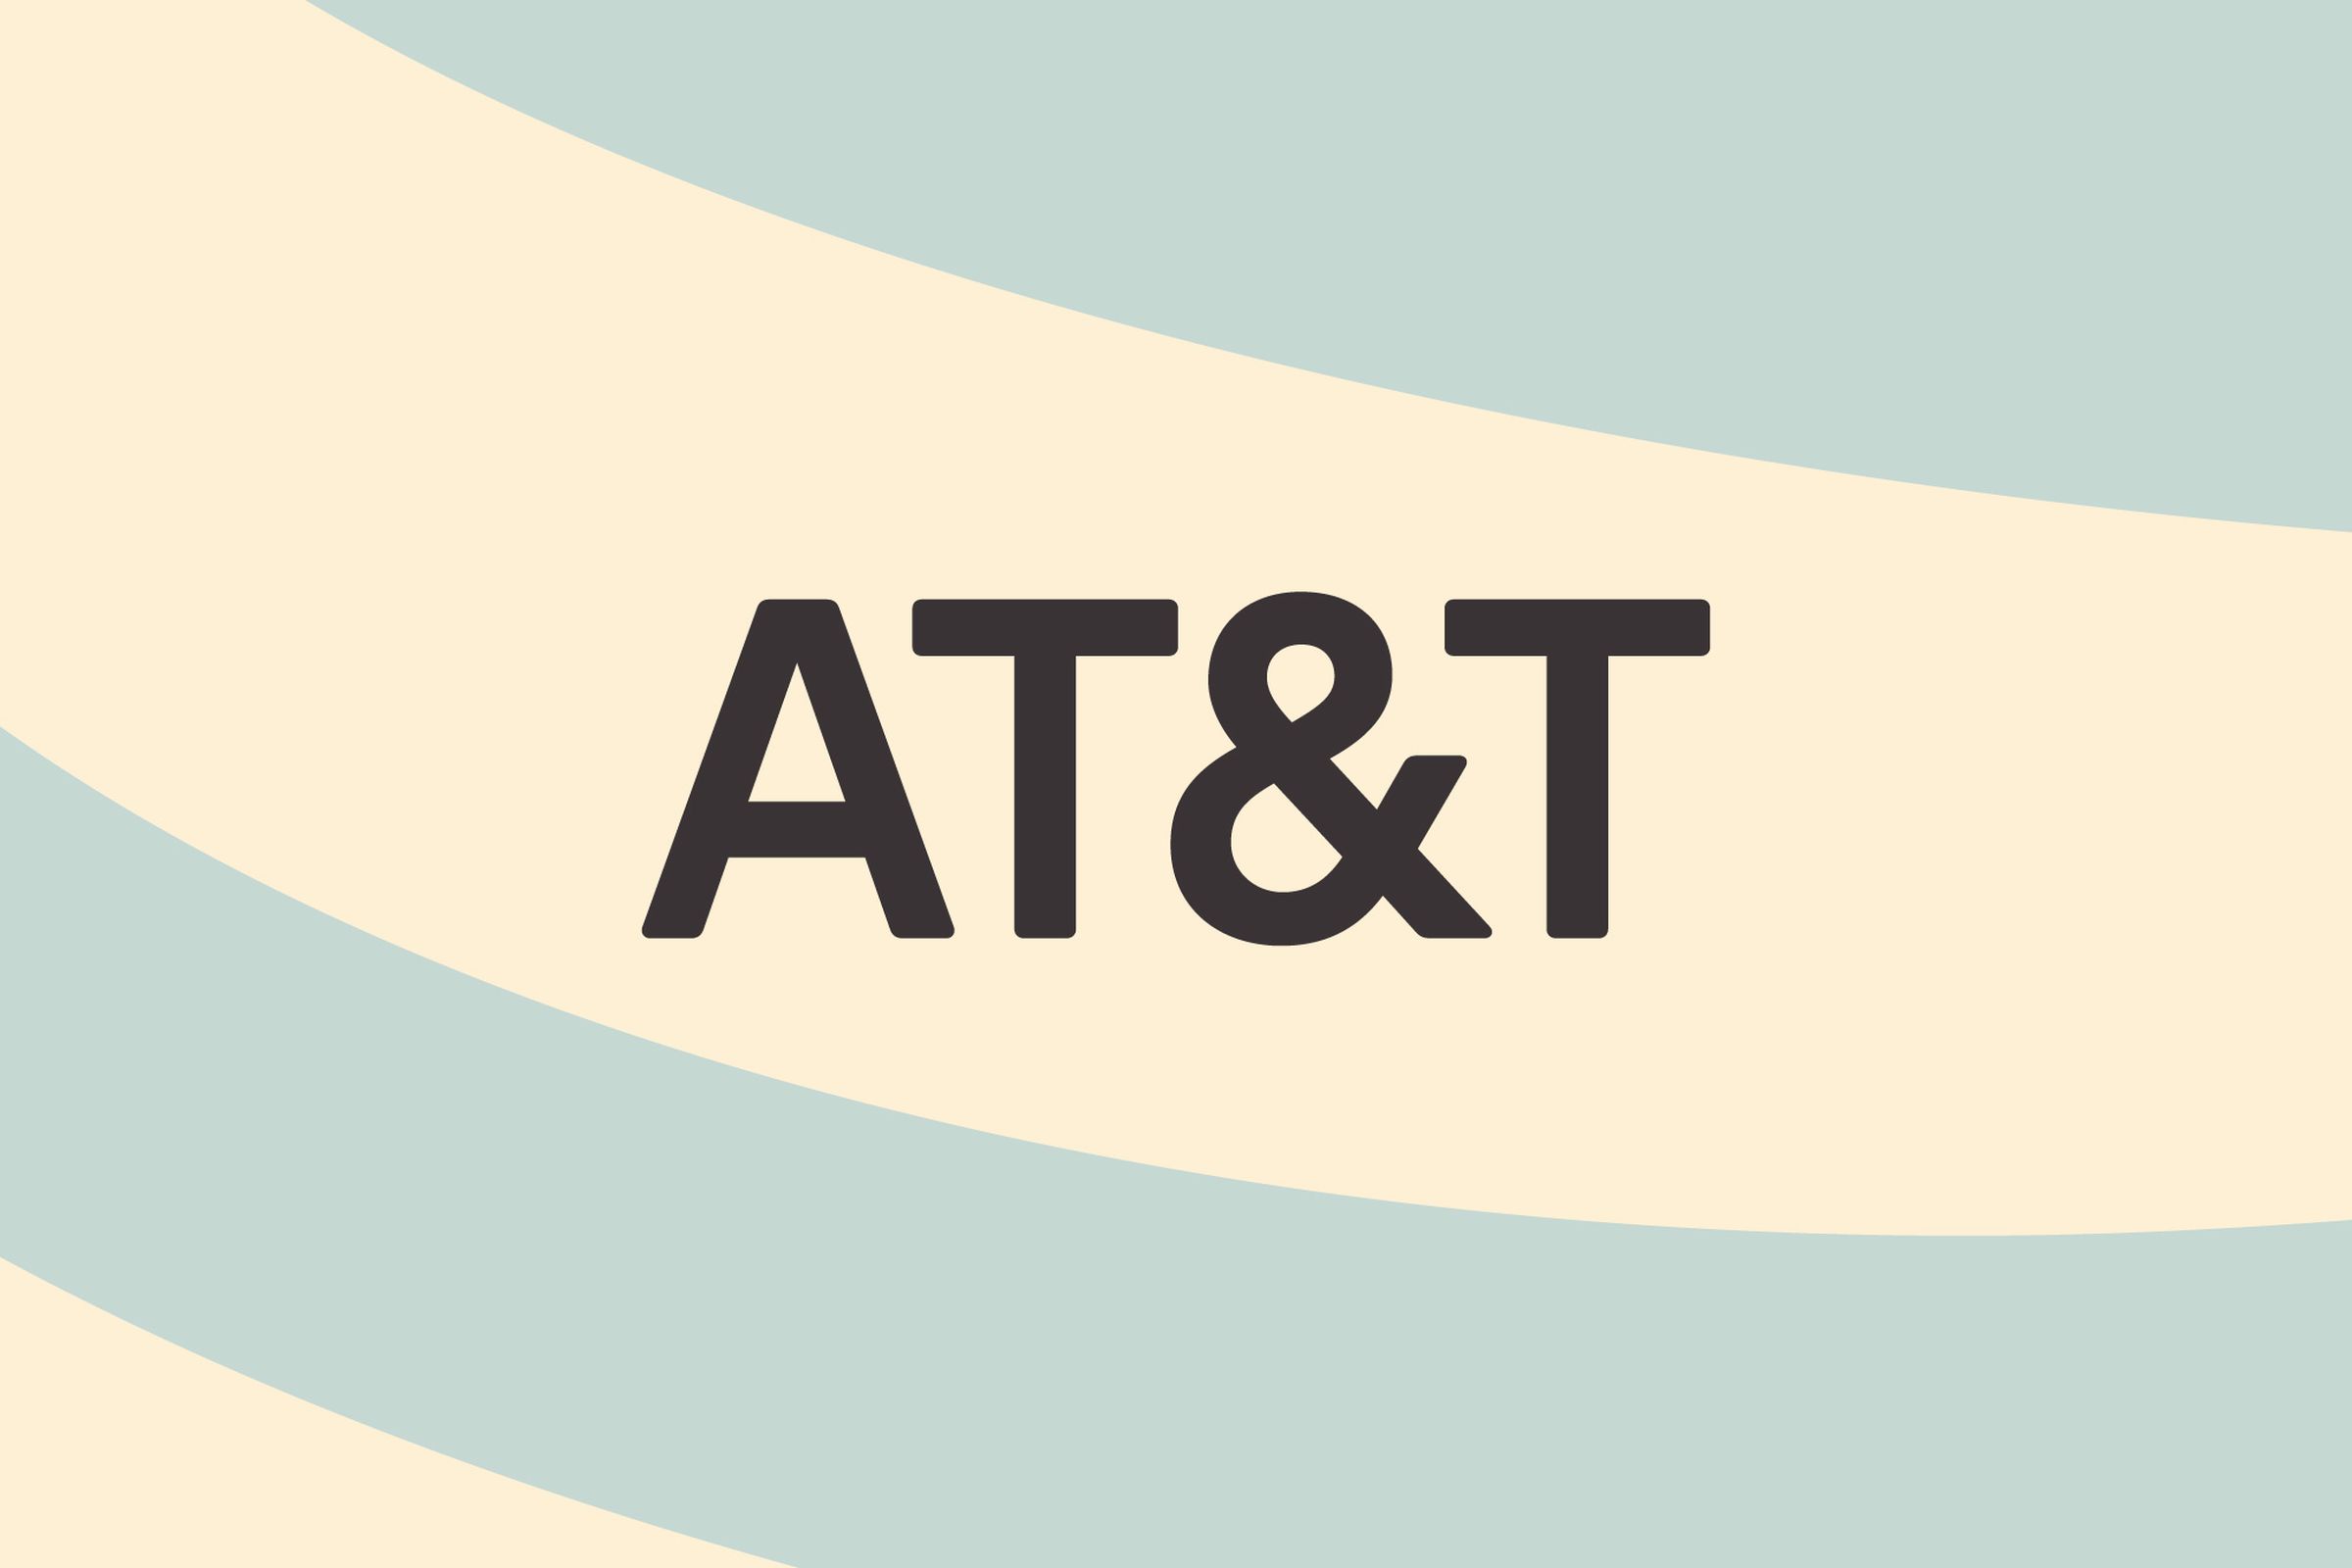 The text AT&T logo on a light blue and tan background